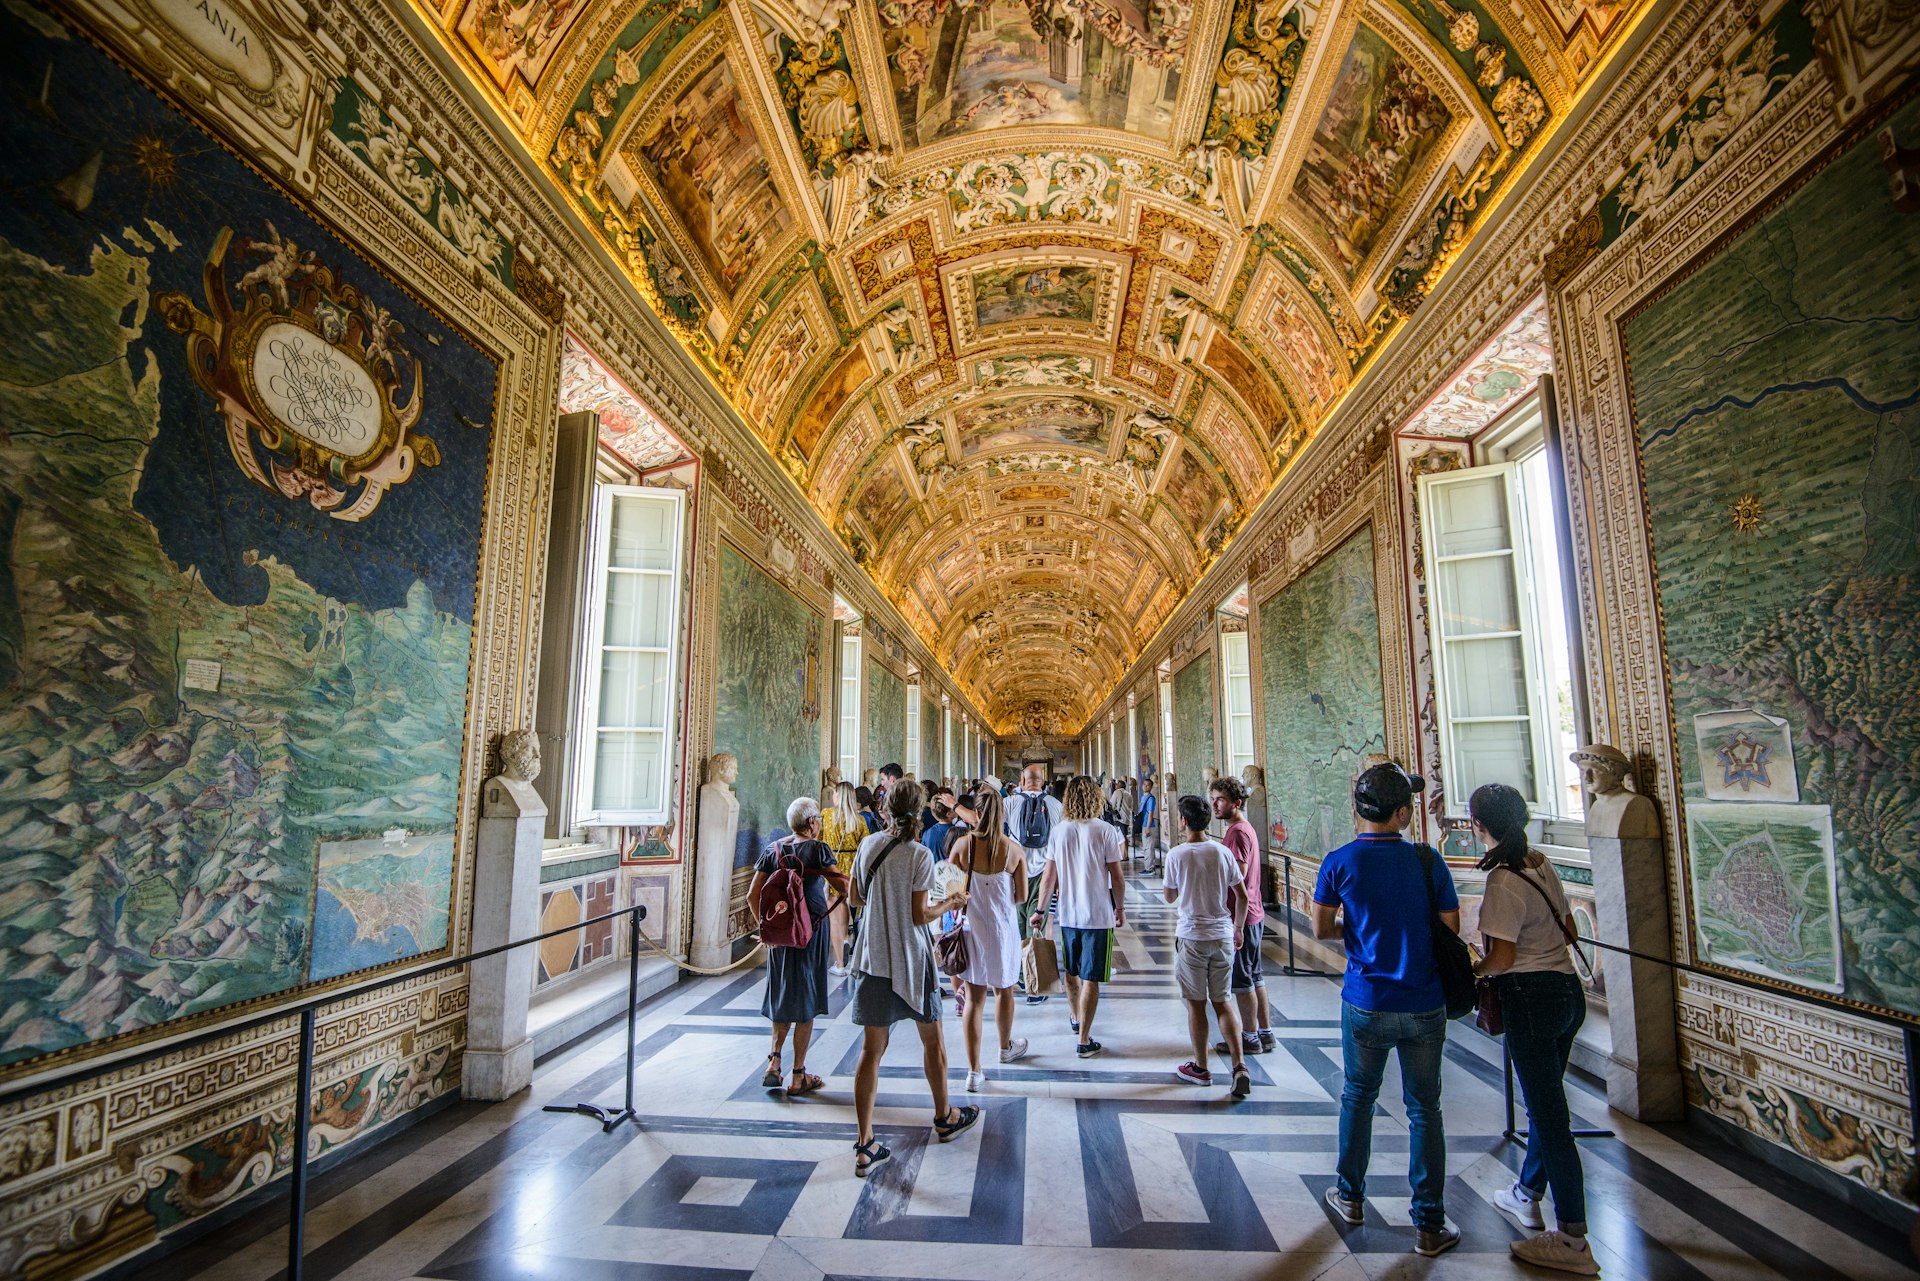 Visitors walk under frescoes in a hallway at the Vatican Museum, Rome, Italy